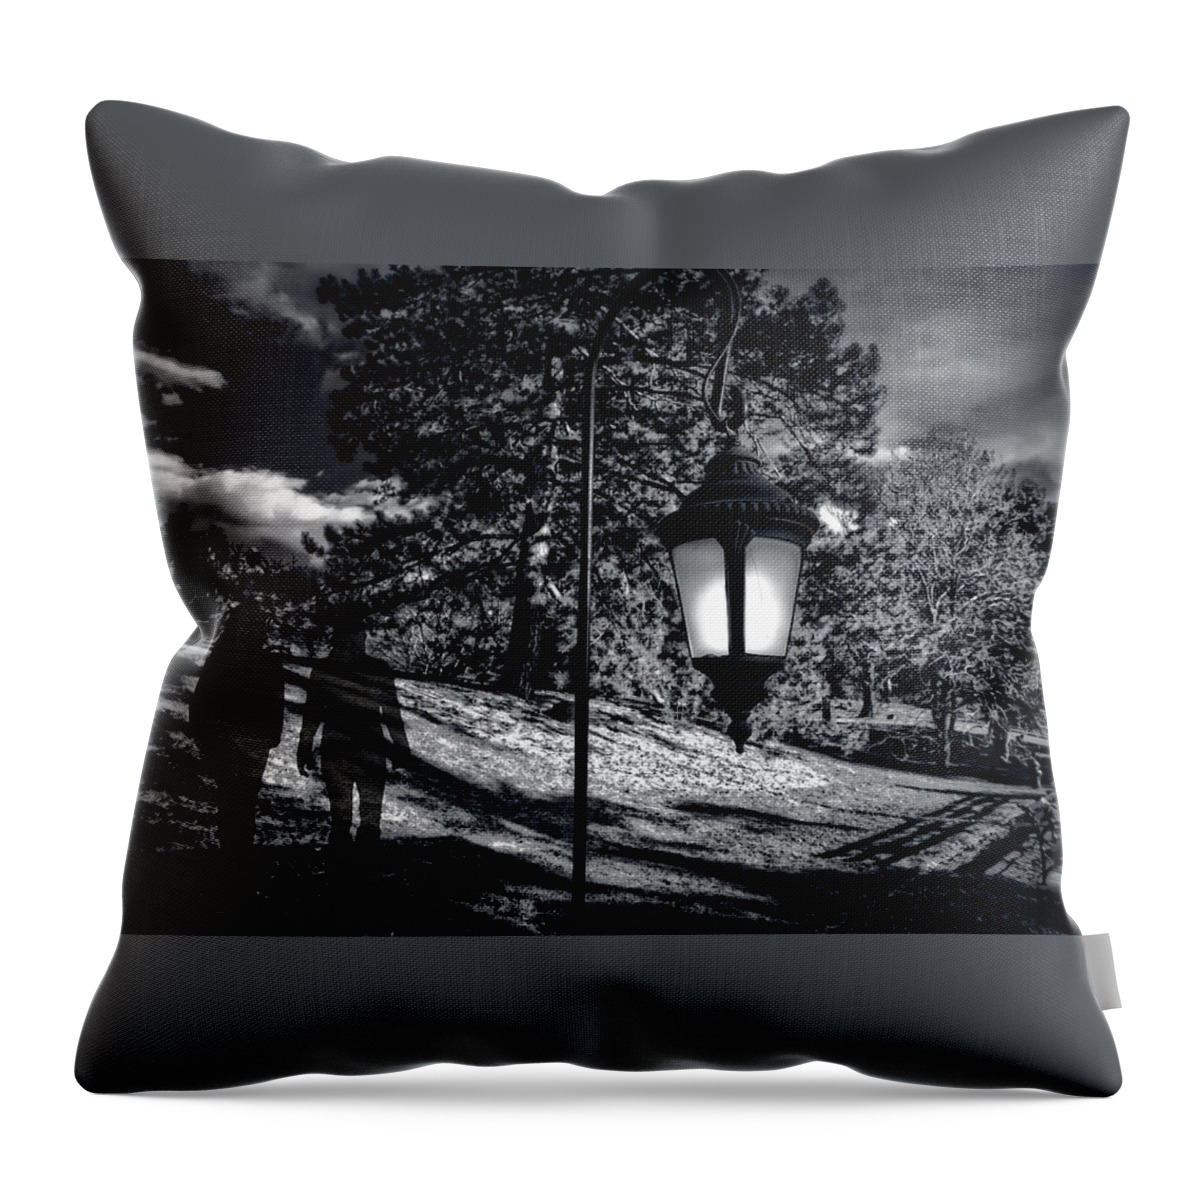 Ghost Throw Pillow featuring the digital art Ghost Couple Walking in Park by Russel Considine